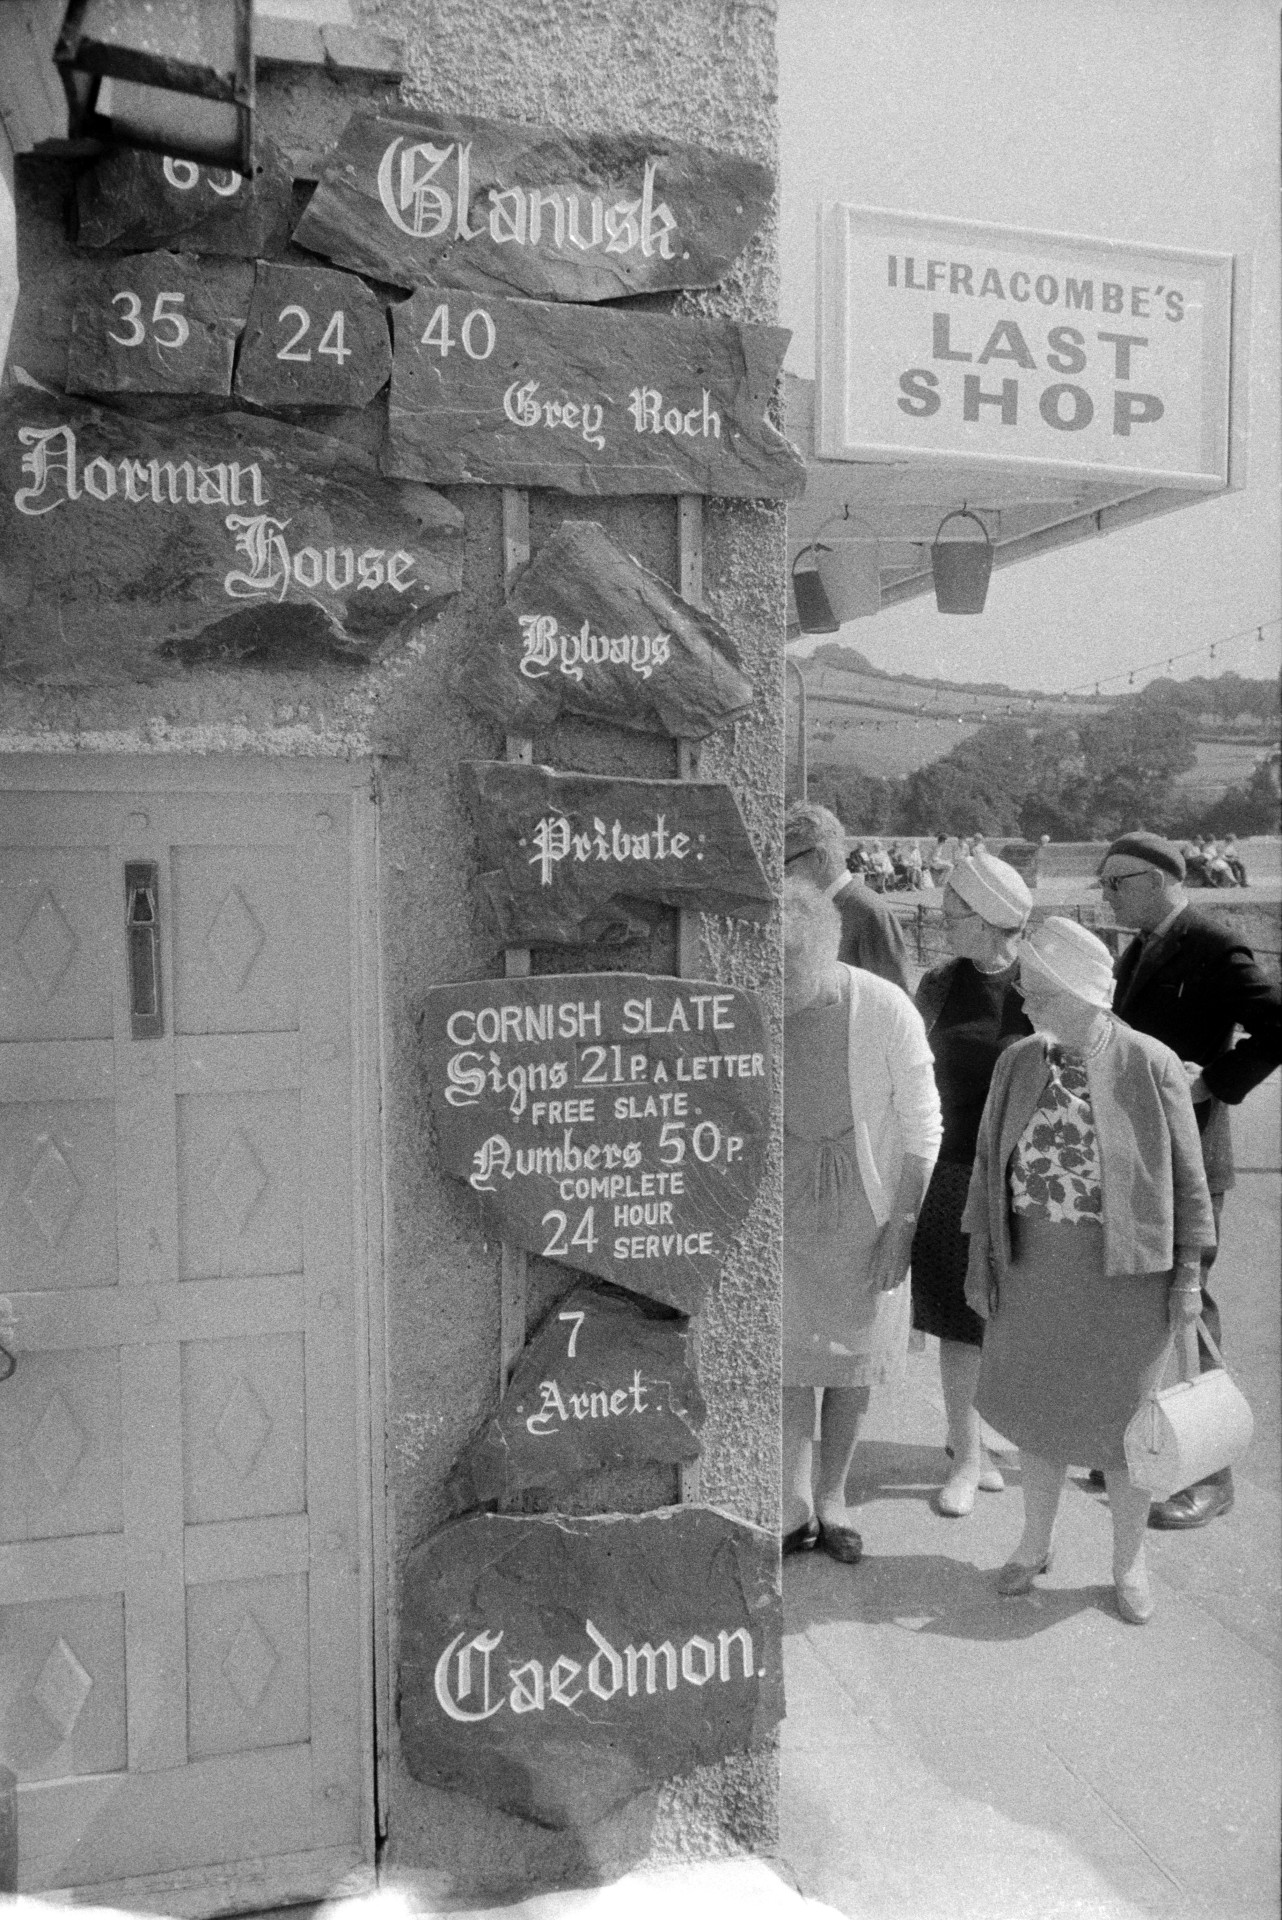 Men and women looking in the shop window of 'Ilfracombe's last shop'. House signs and numbers are displayed outside.